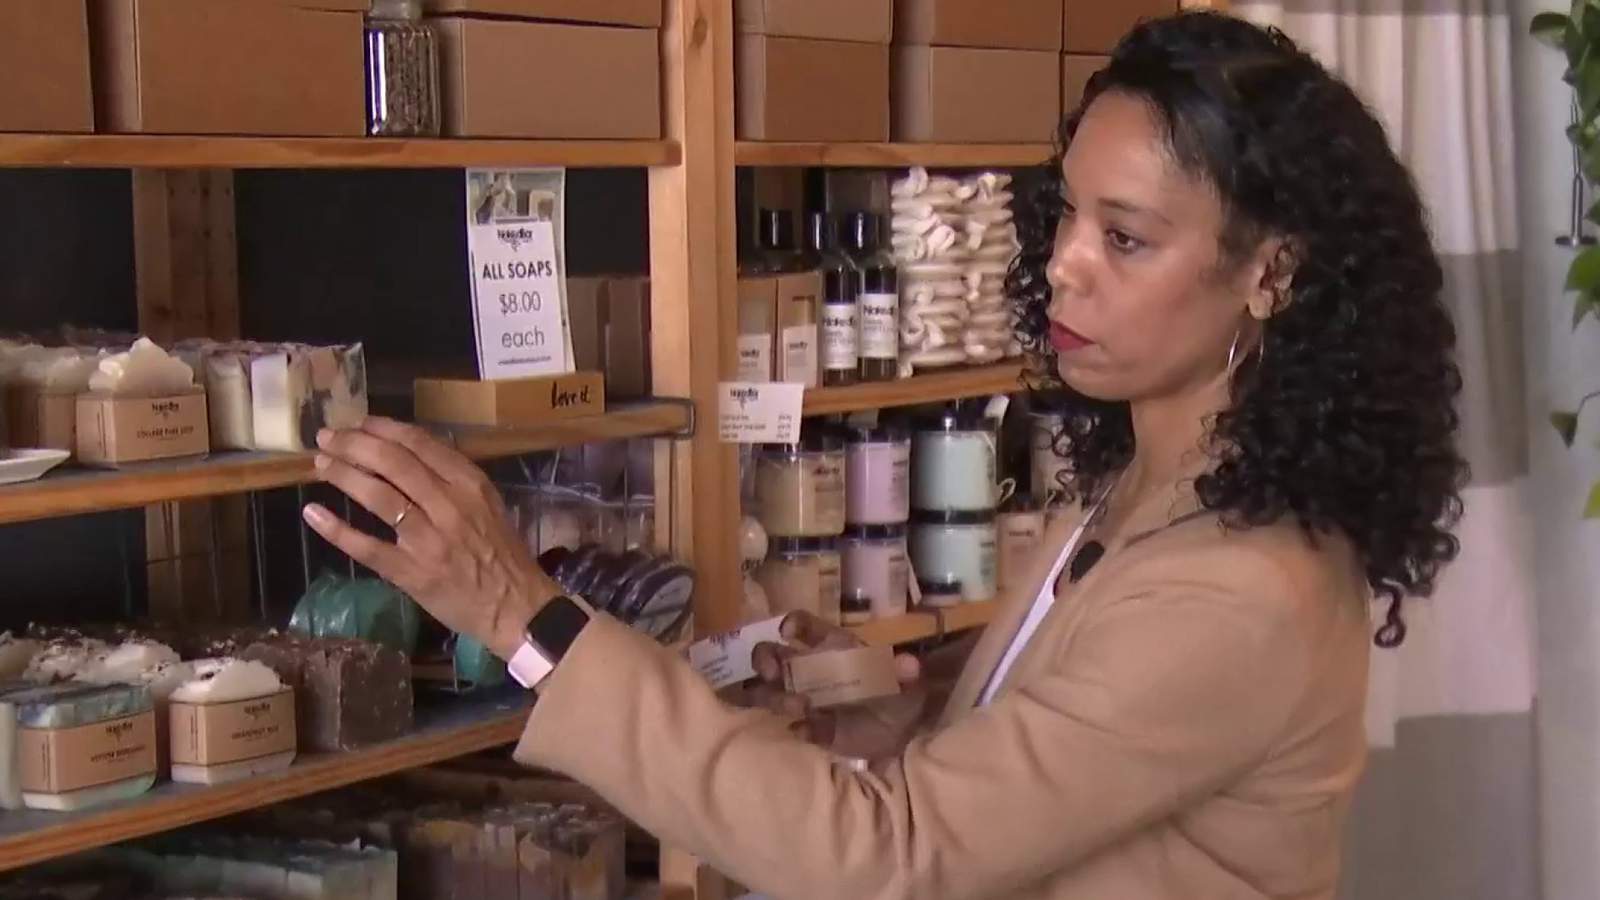 Keeping it natural: Orlando mom becomes entrepreneur after sons skin condition